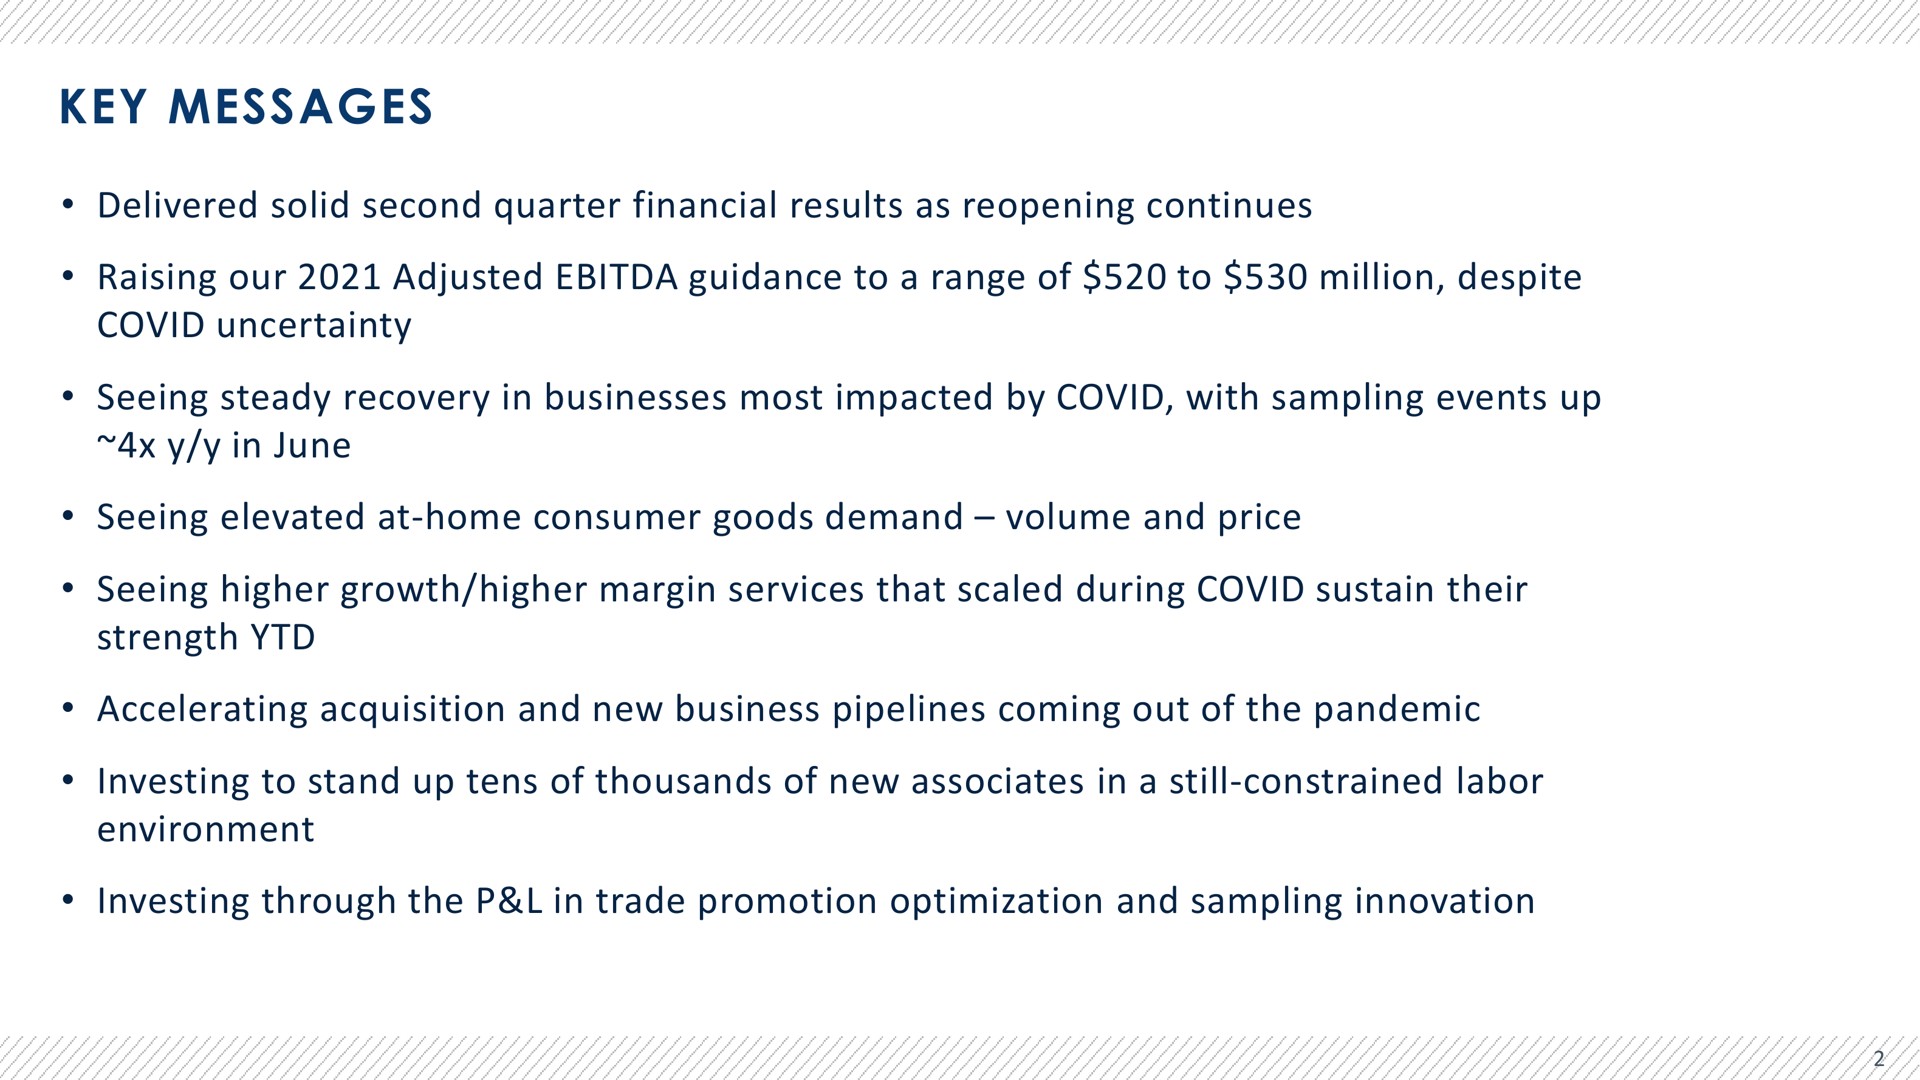 key messages delivered solid second quarter financial results as reopening continues raising our adjusted guidance to a range of to million despite covid uncertainty seeing steady recovery in businesses most impacted by covid with sampling events up in june seeing elevated at home consumer goods demand volume and price seeing higher growth higher margin services that scaled during covid sustain their strength accelerating acquisition and new business pipelines coming out of the pandemic investing to stand up tens of thousands of new associates in a still constrained labor environment investing through the in trade promotion optimization and sampling innovation | Advantage Solutions